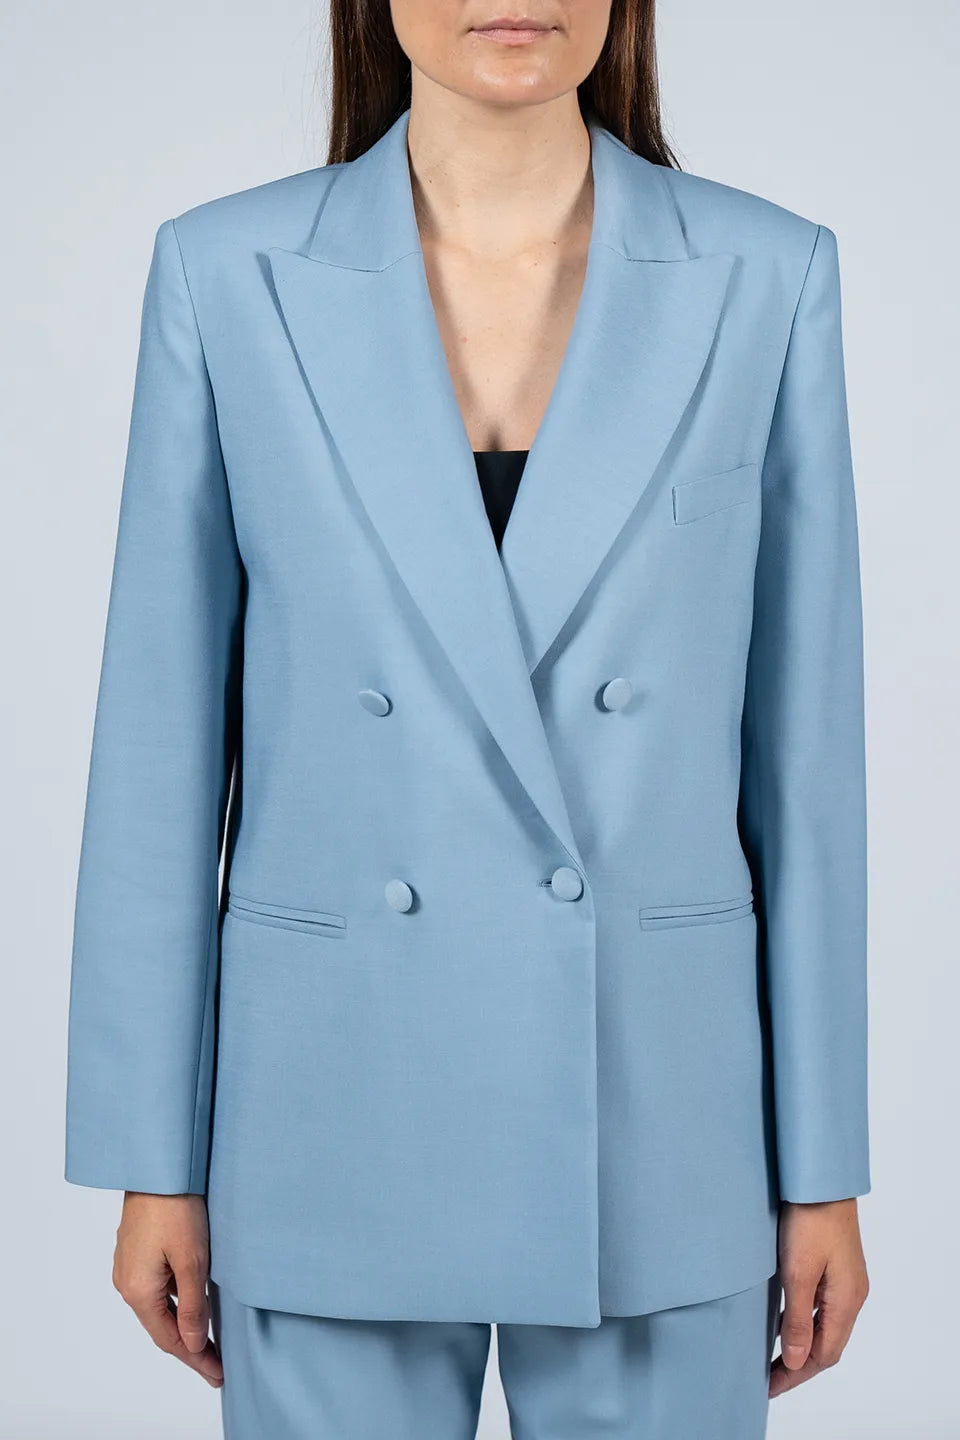 Shop online trendy Blue Women blazers, Jacket from Federica Tosi Fashion designer. Product gallery 1